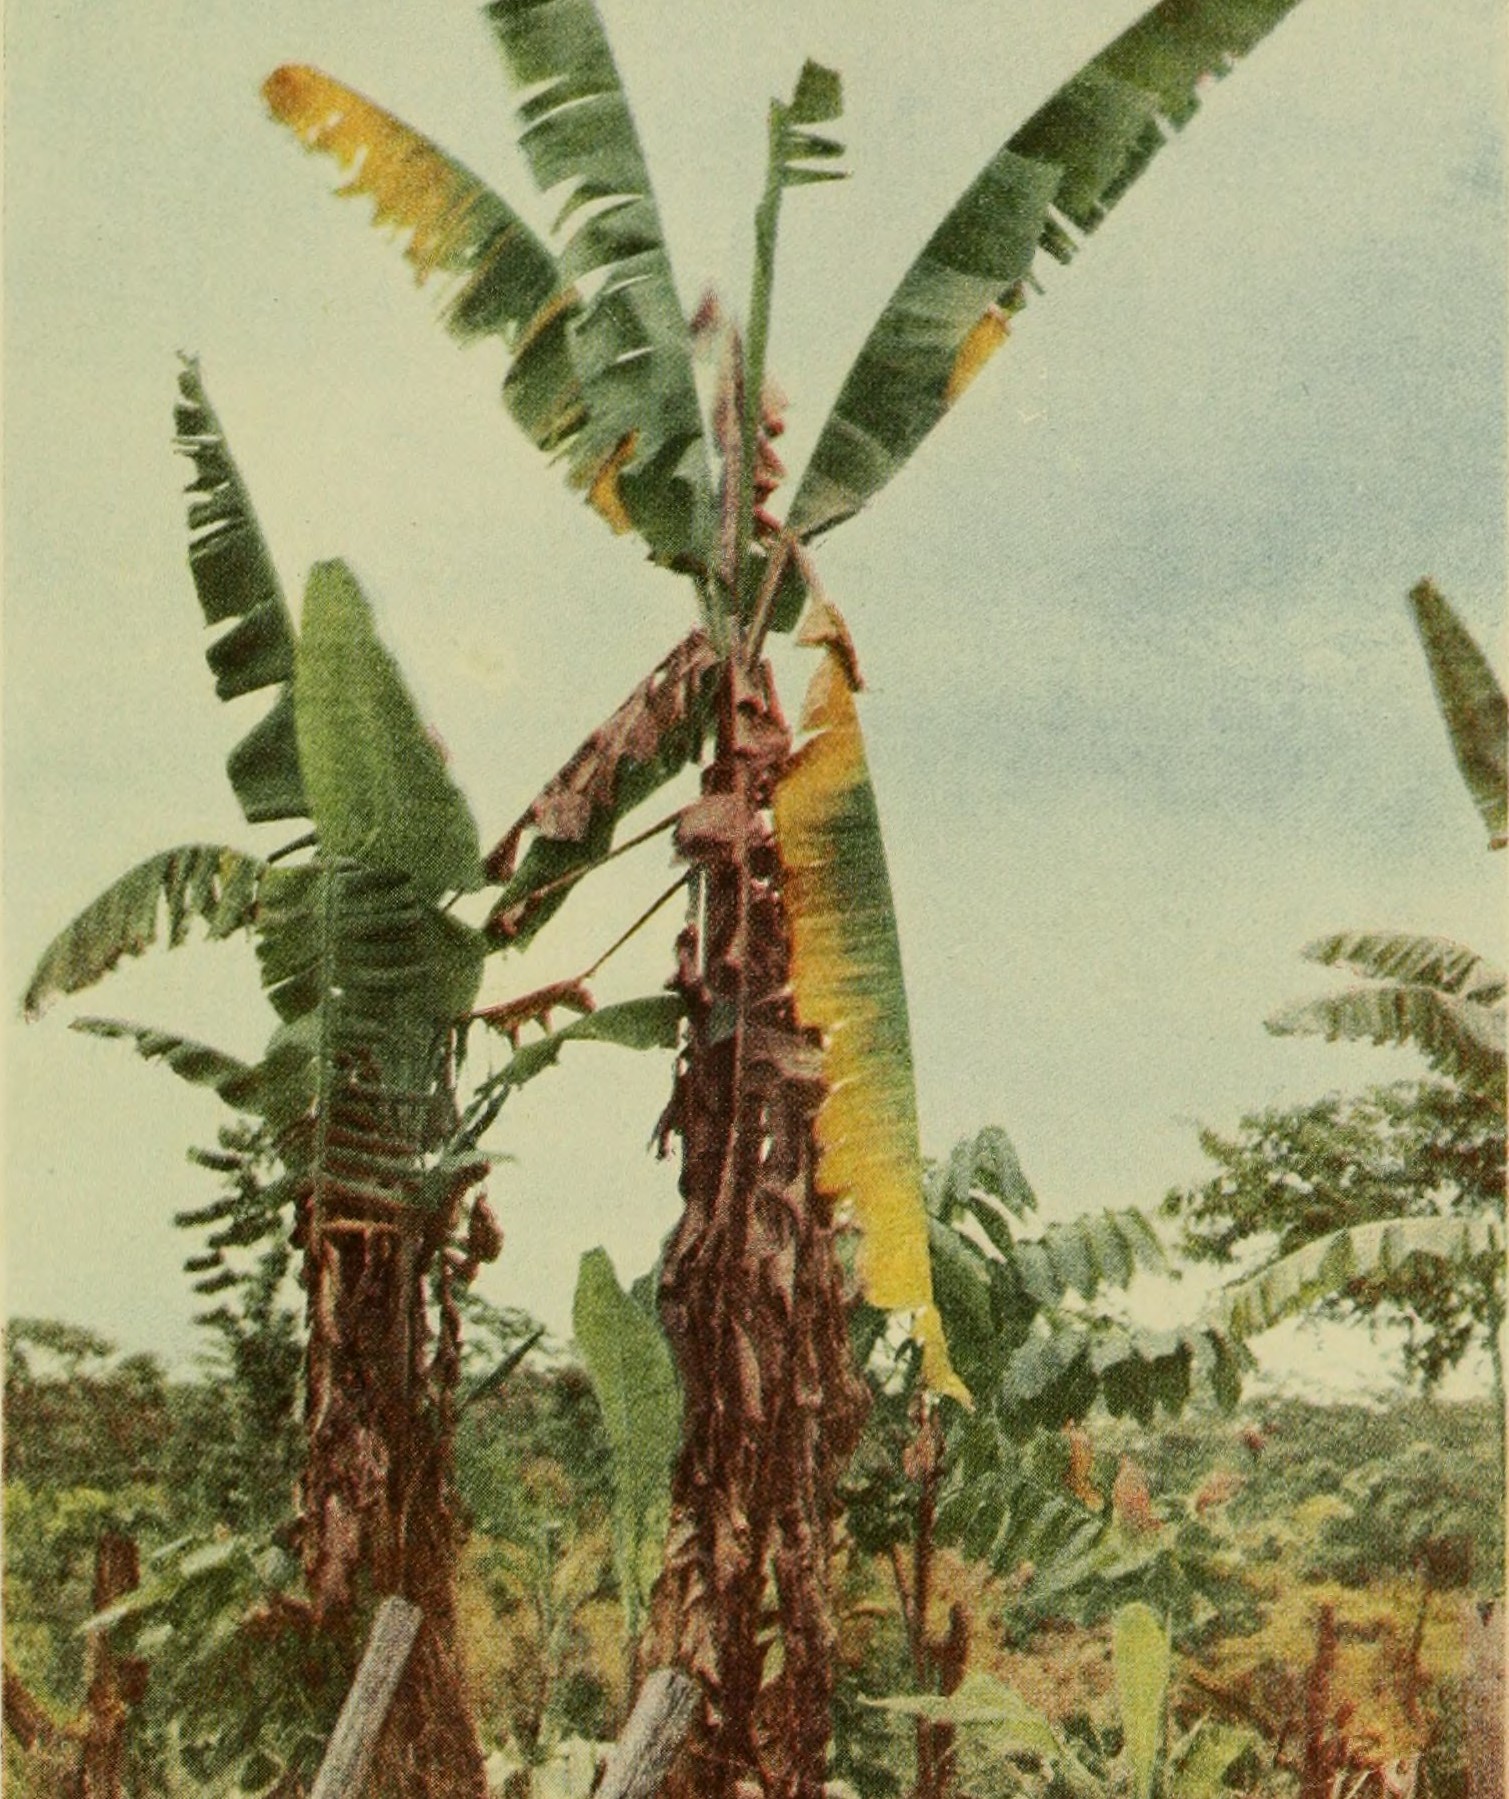 A banana plants leaves are nearly entirely blackened and wilted by disease